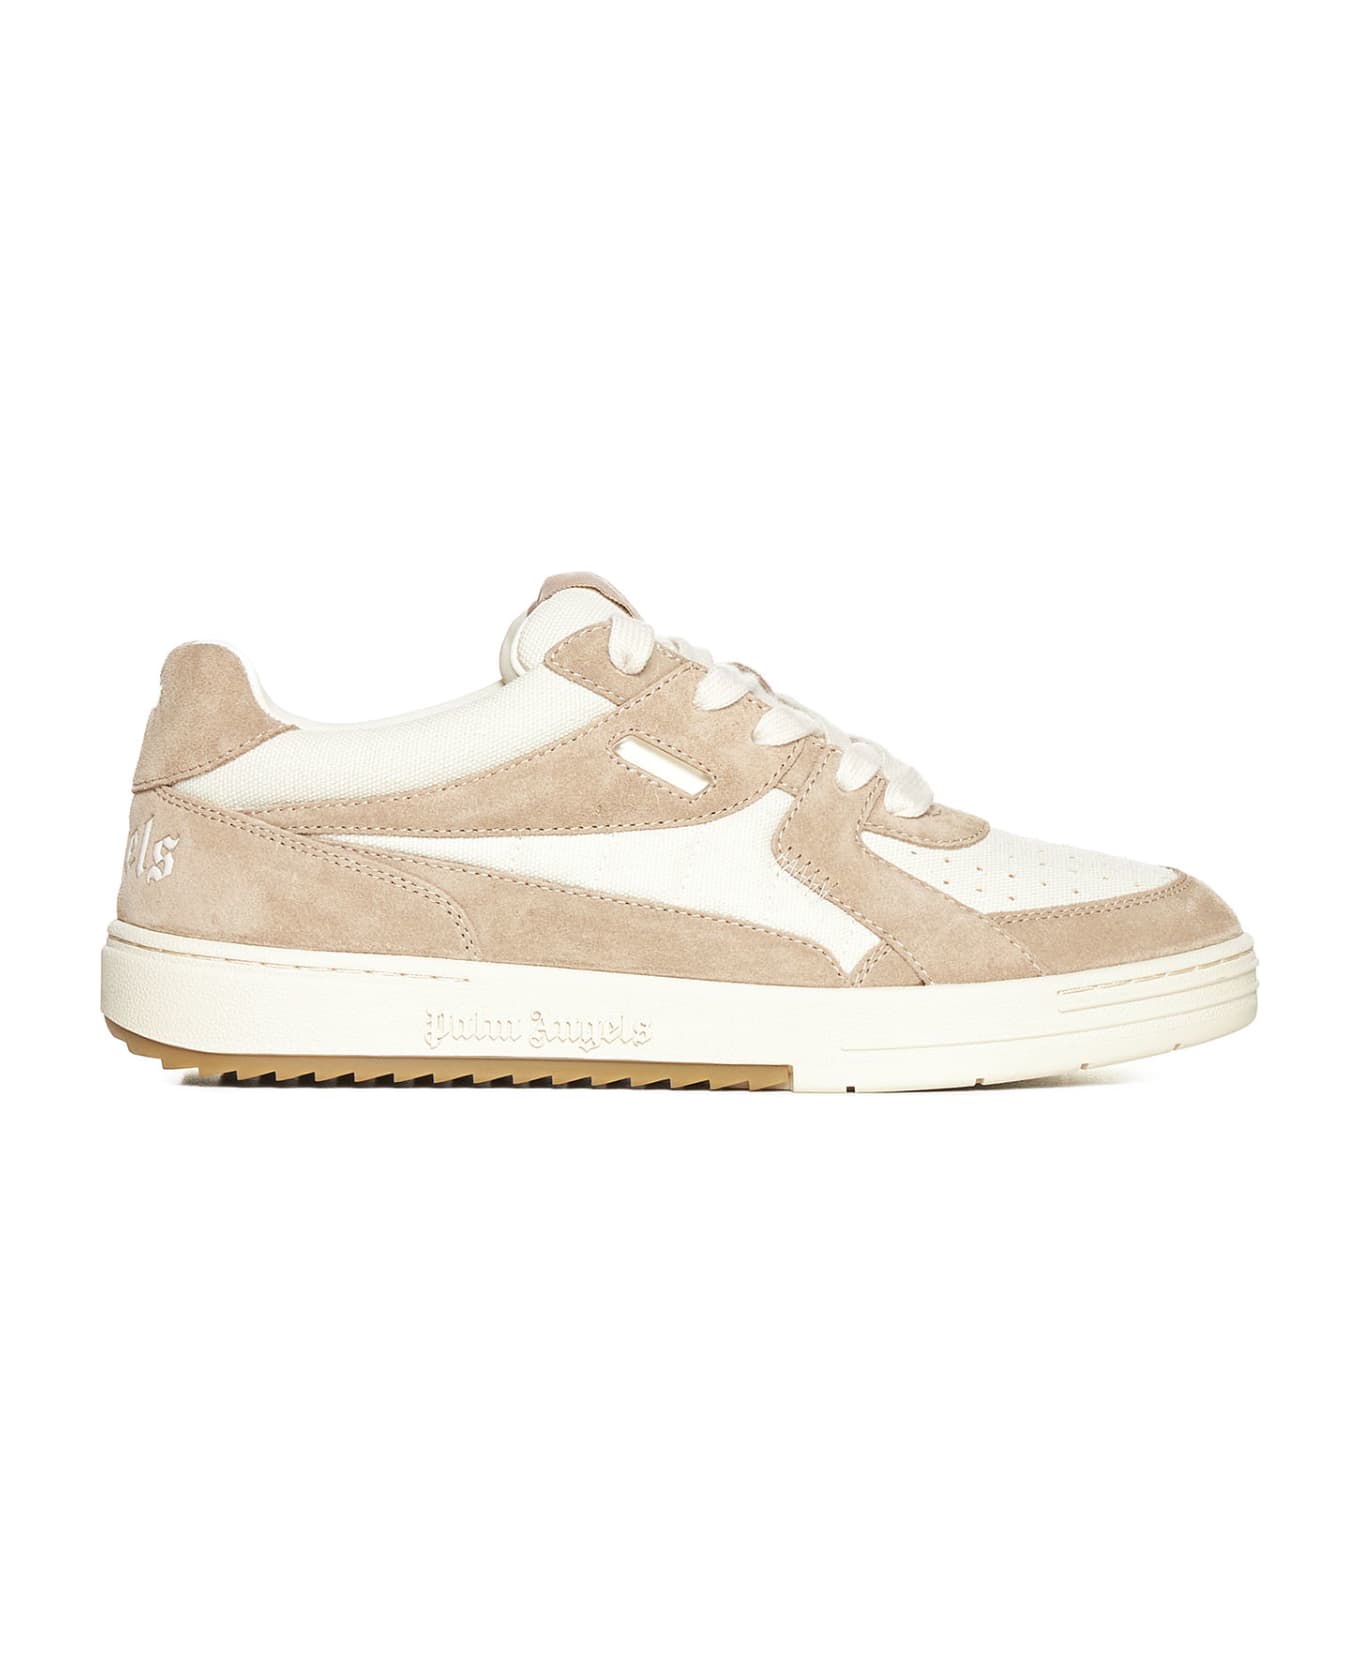 Palm Angels University Sneakers - White camel